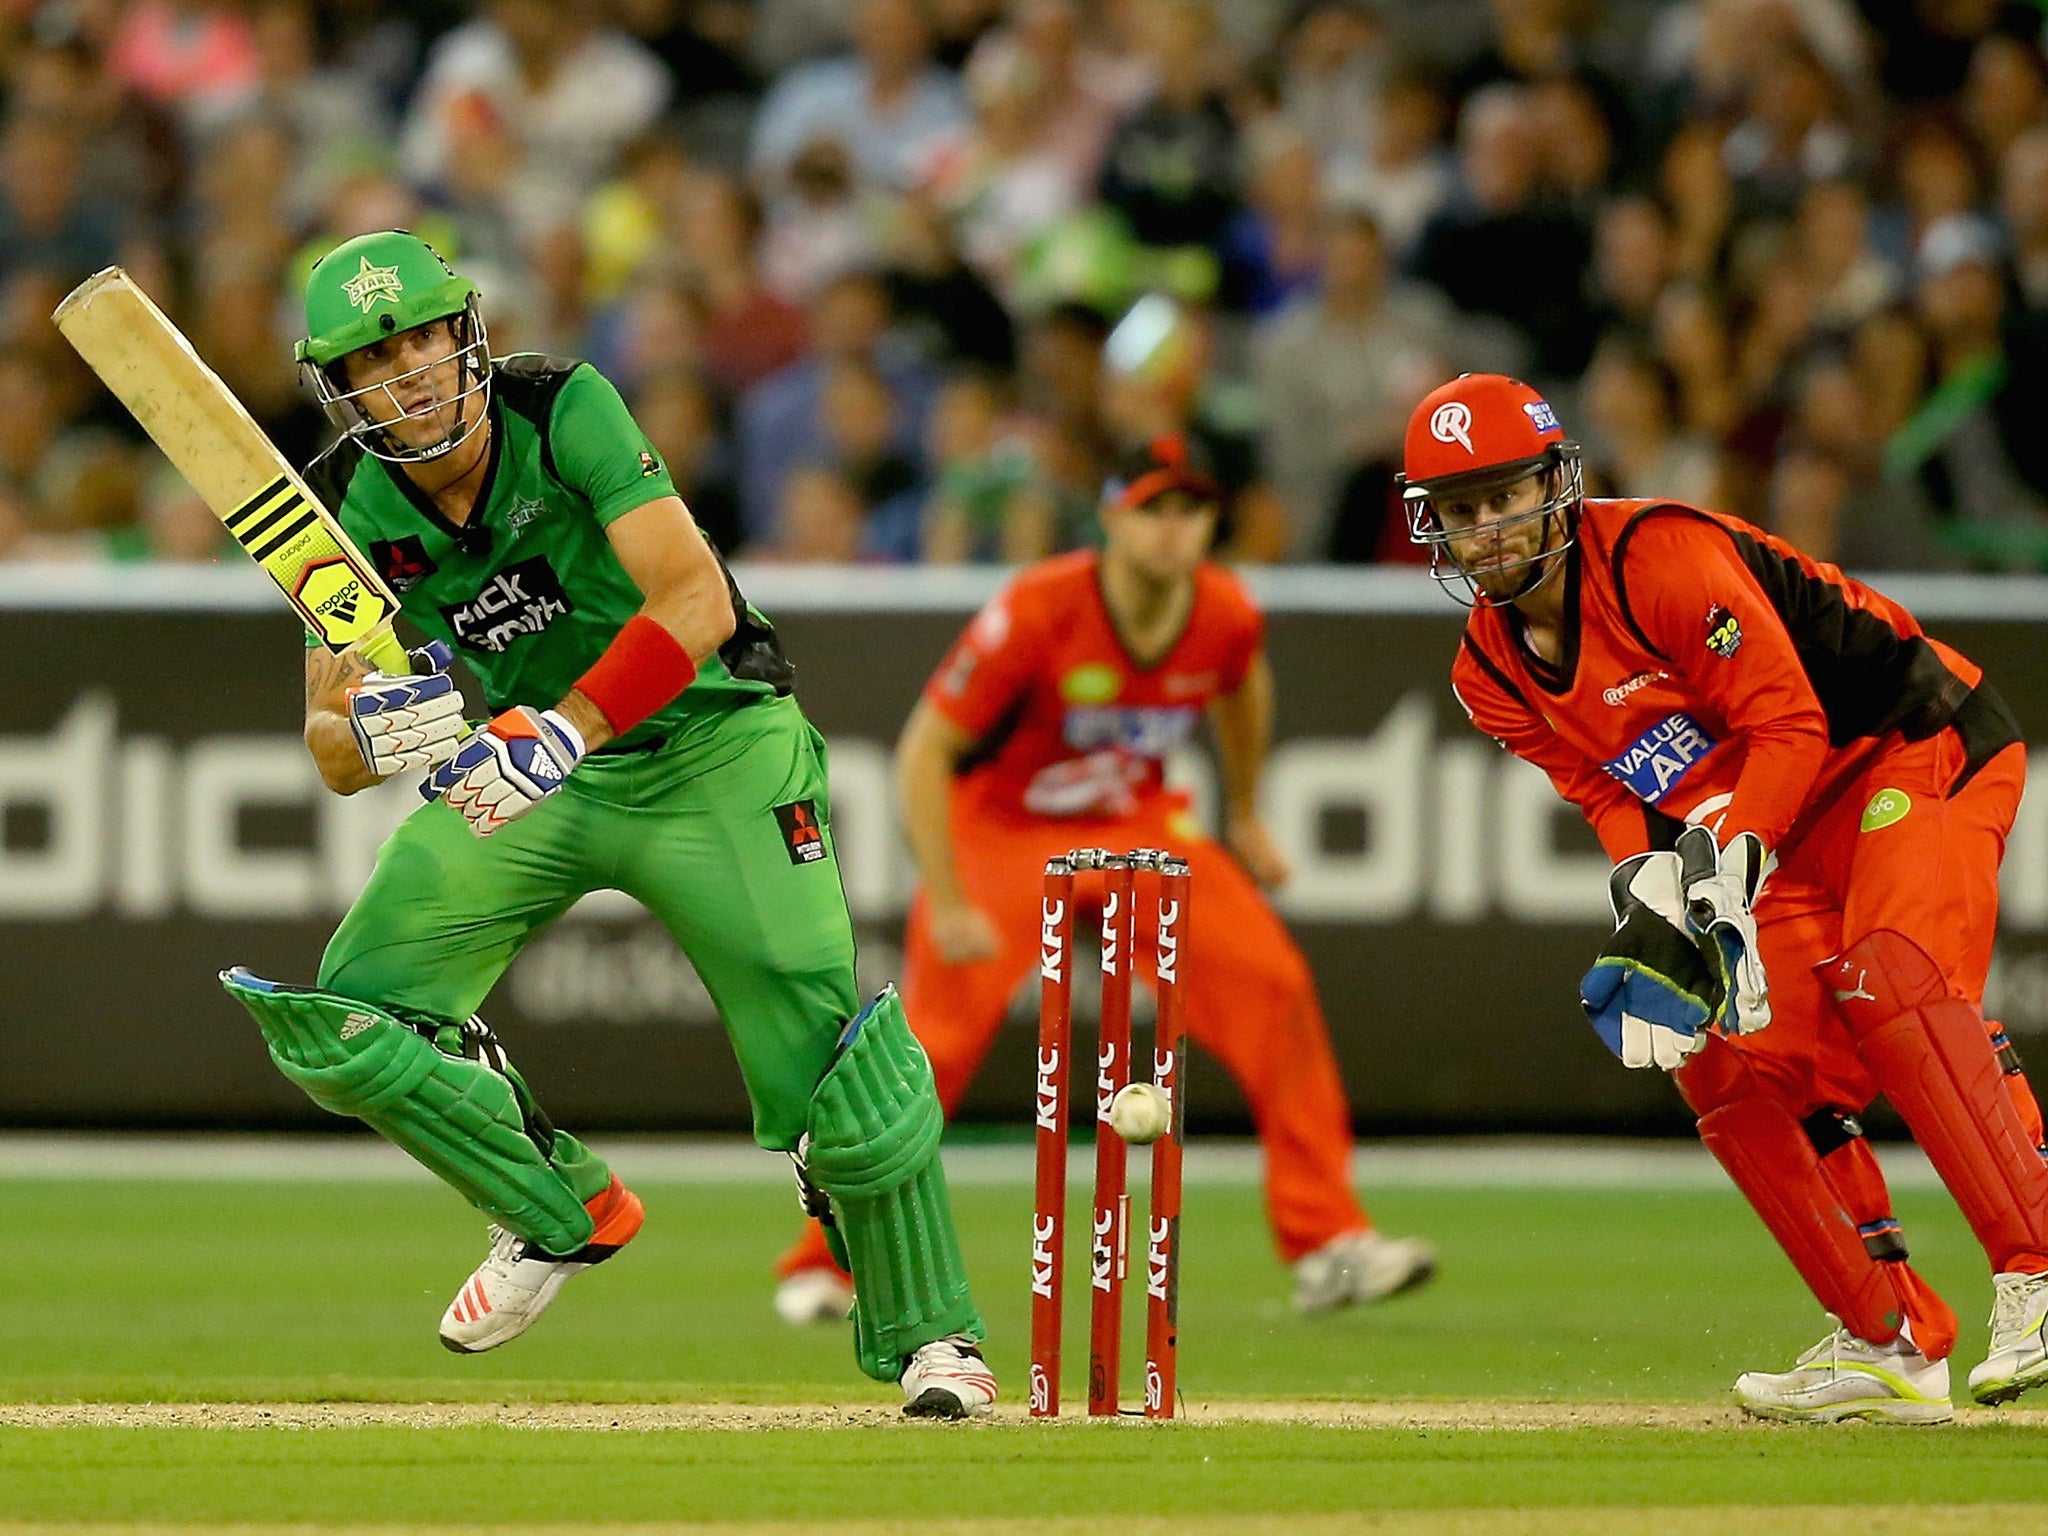 Pietersen is currently in Australia playing in the Big Bash League